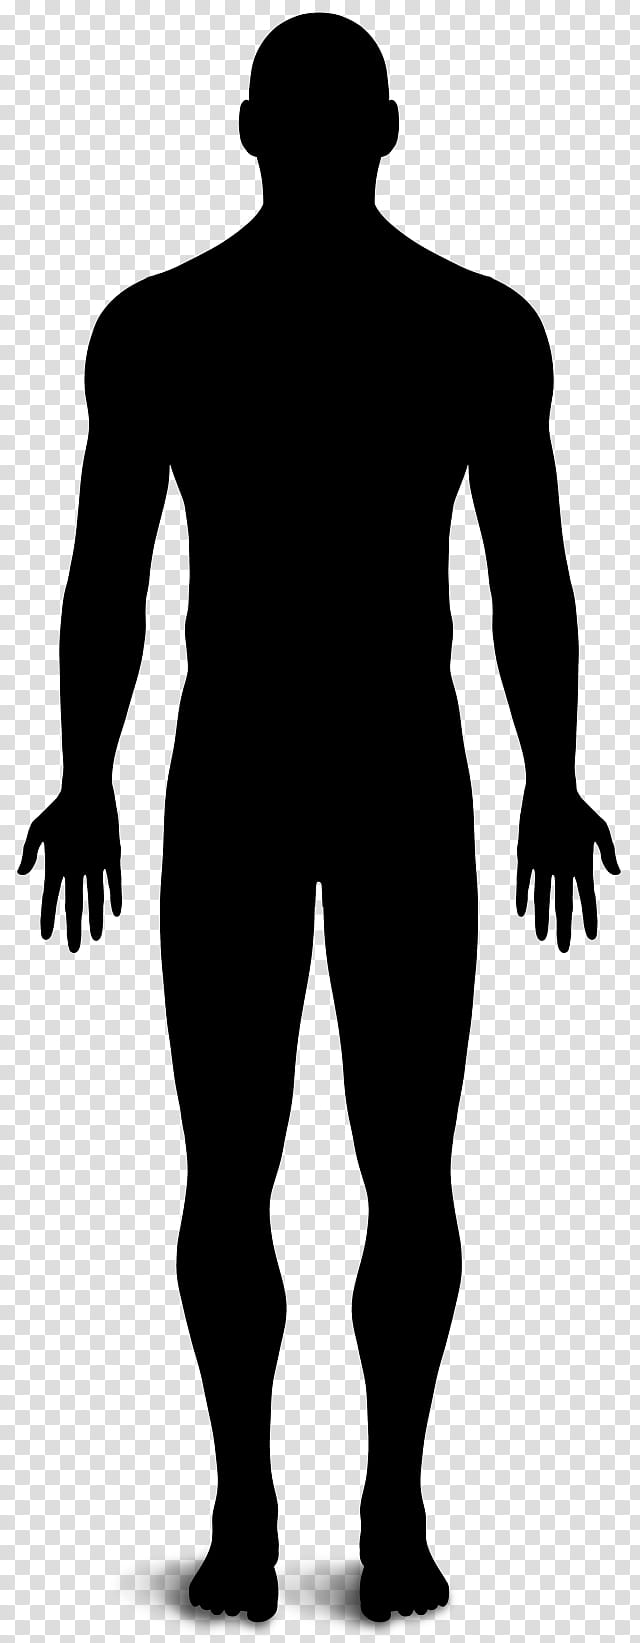 Monster, Bigfoot, Drawing, Silhouette, Cryptozoology, Yeti, Standing, Male transparent background PNG clipart